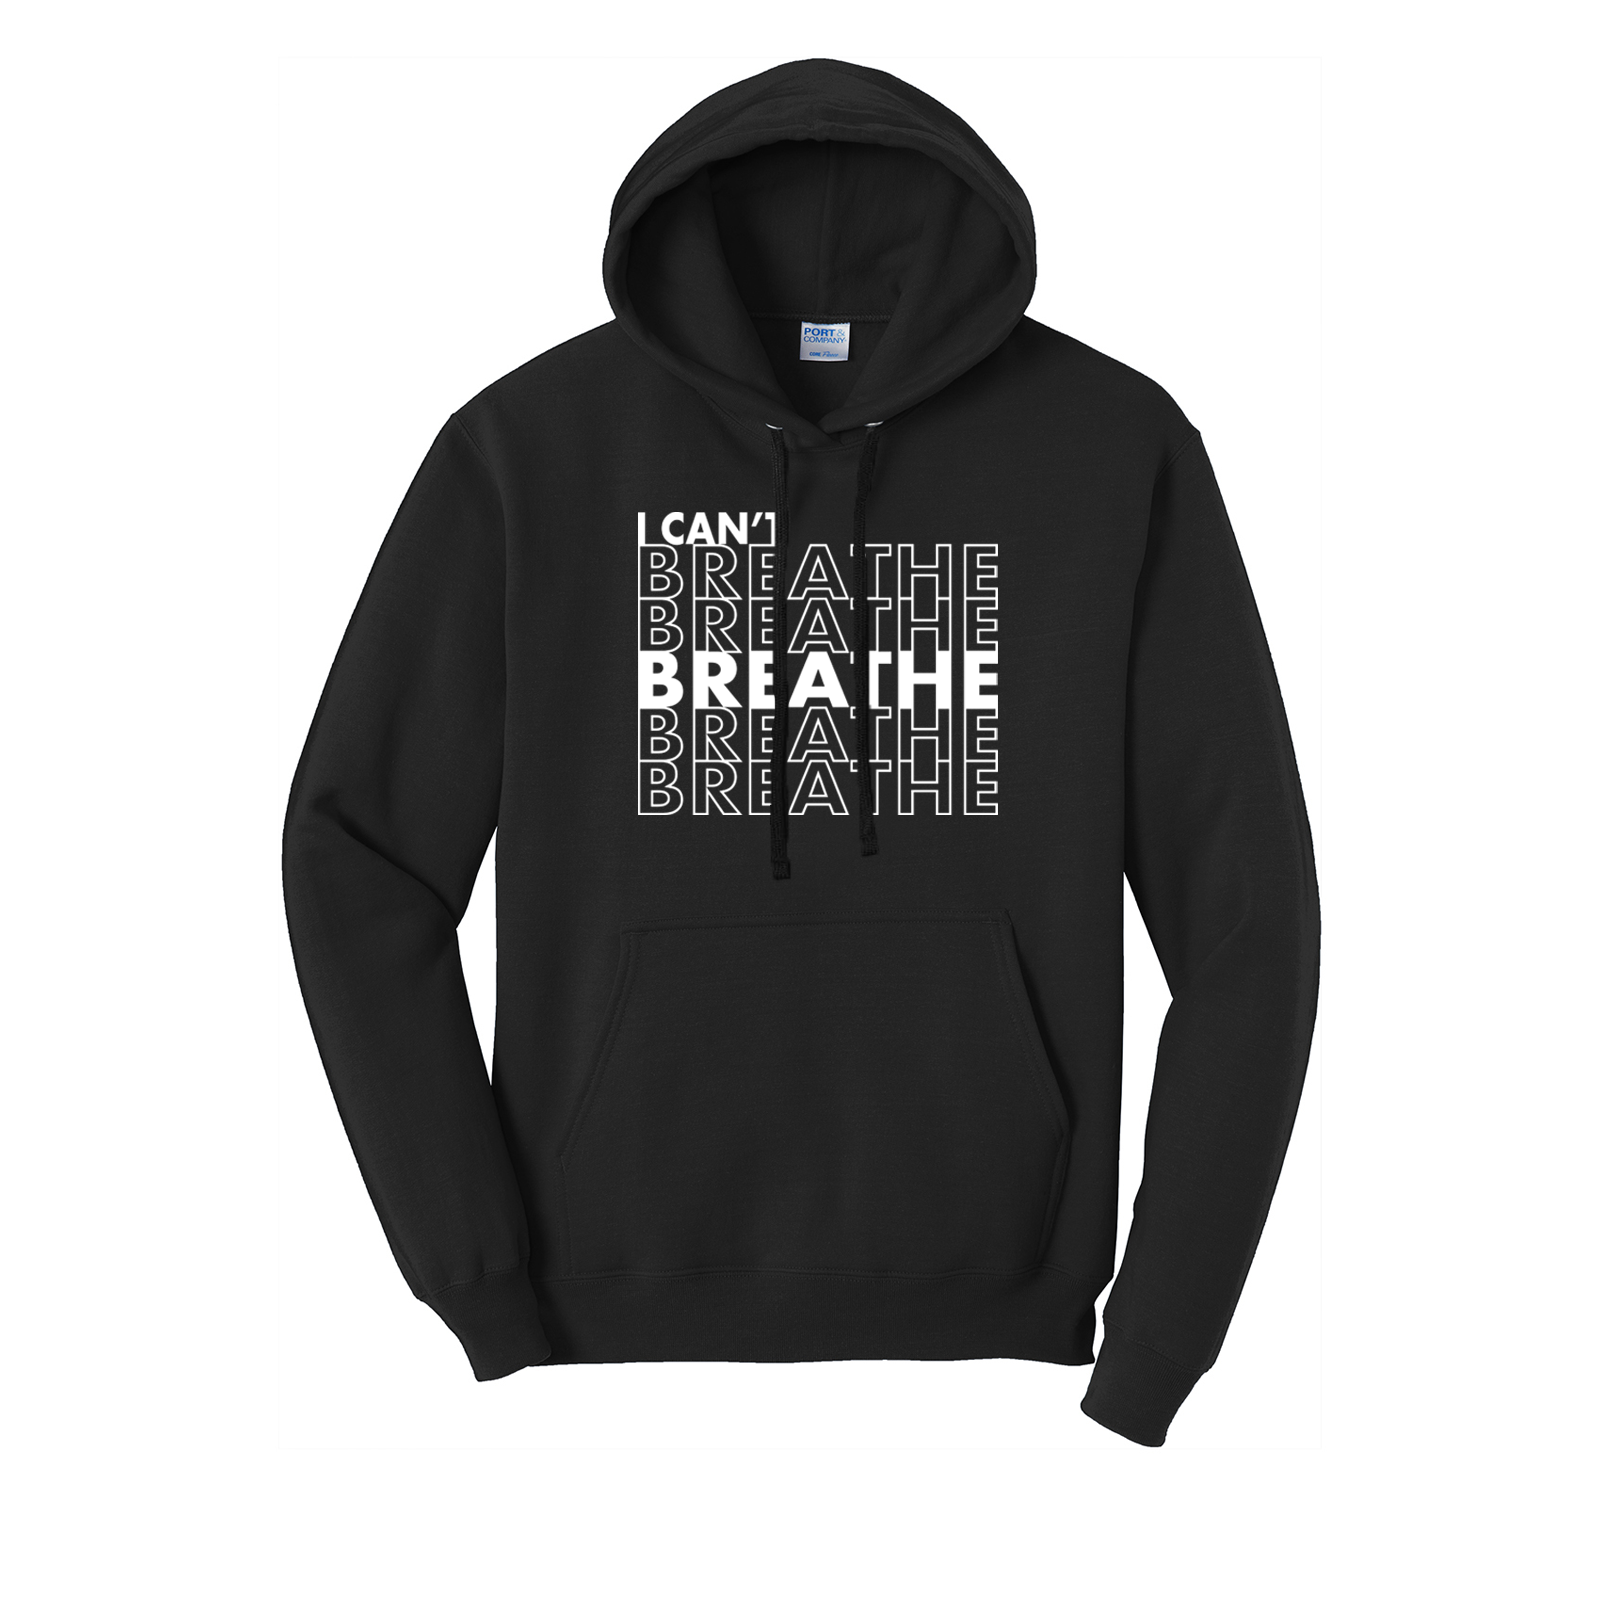 'I Can't Breathe Repeat' Men's Hoodie